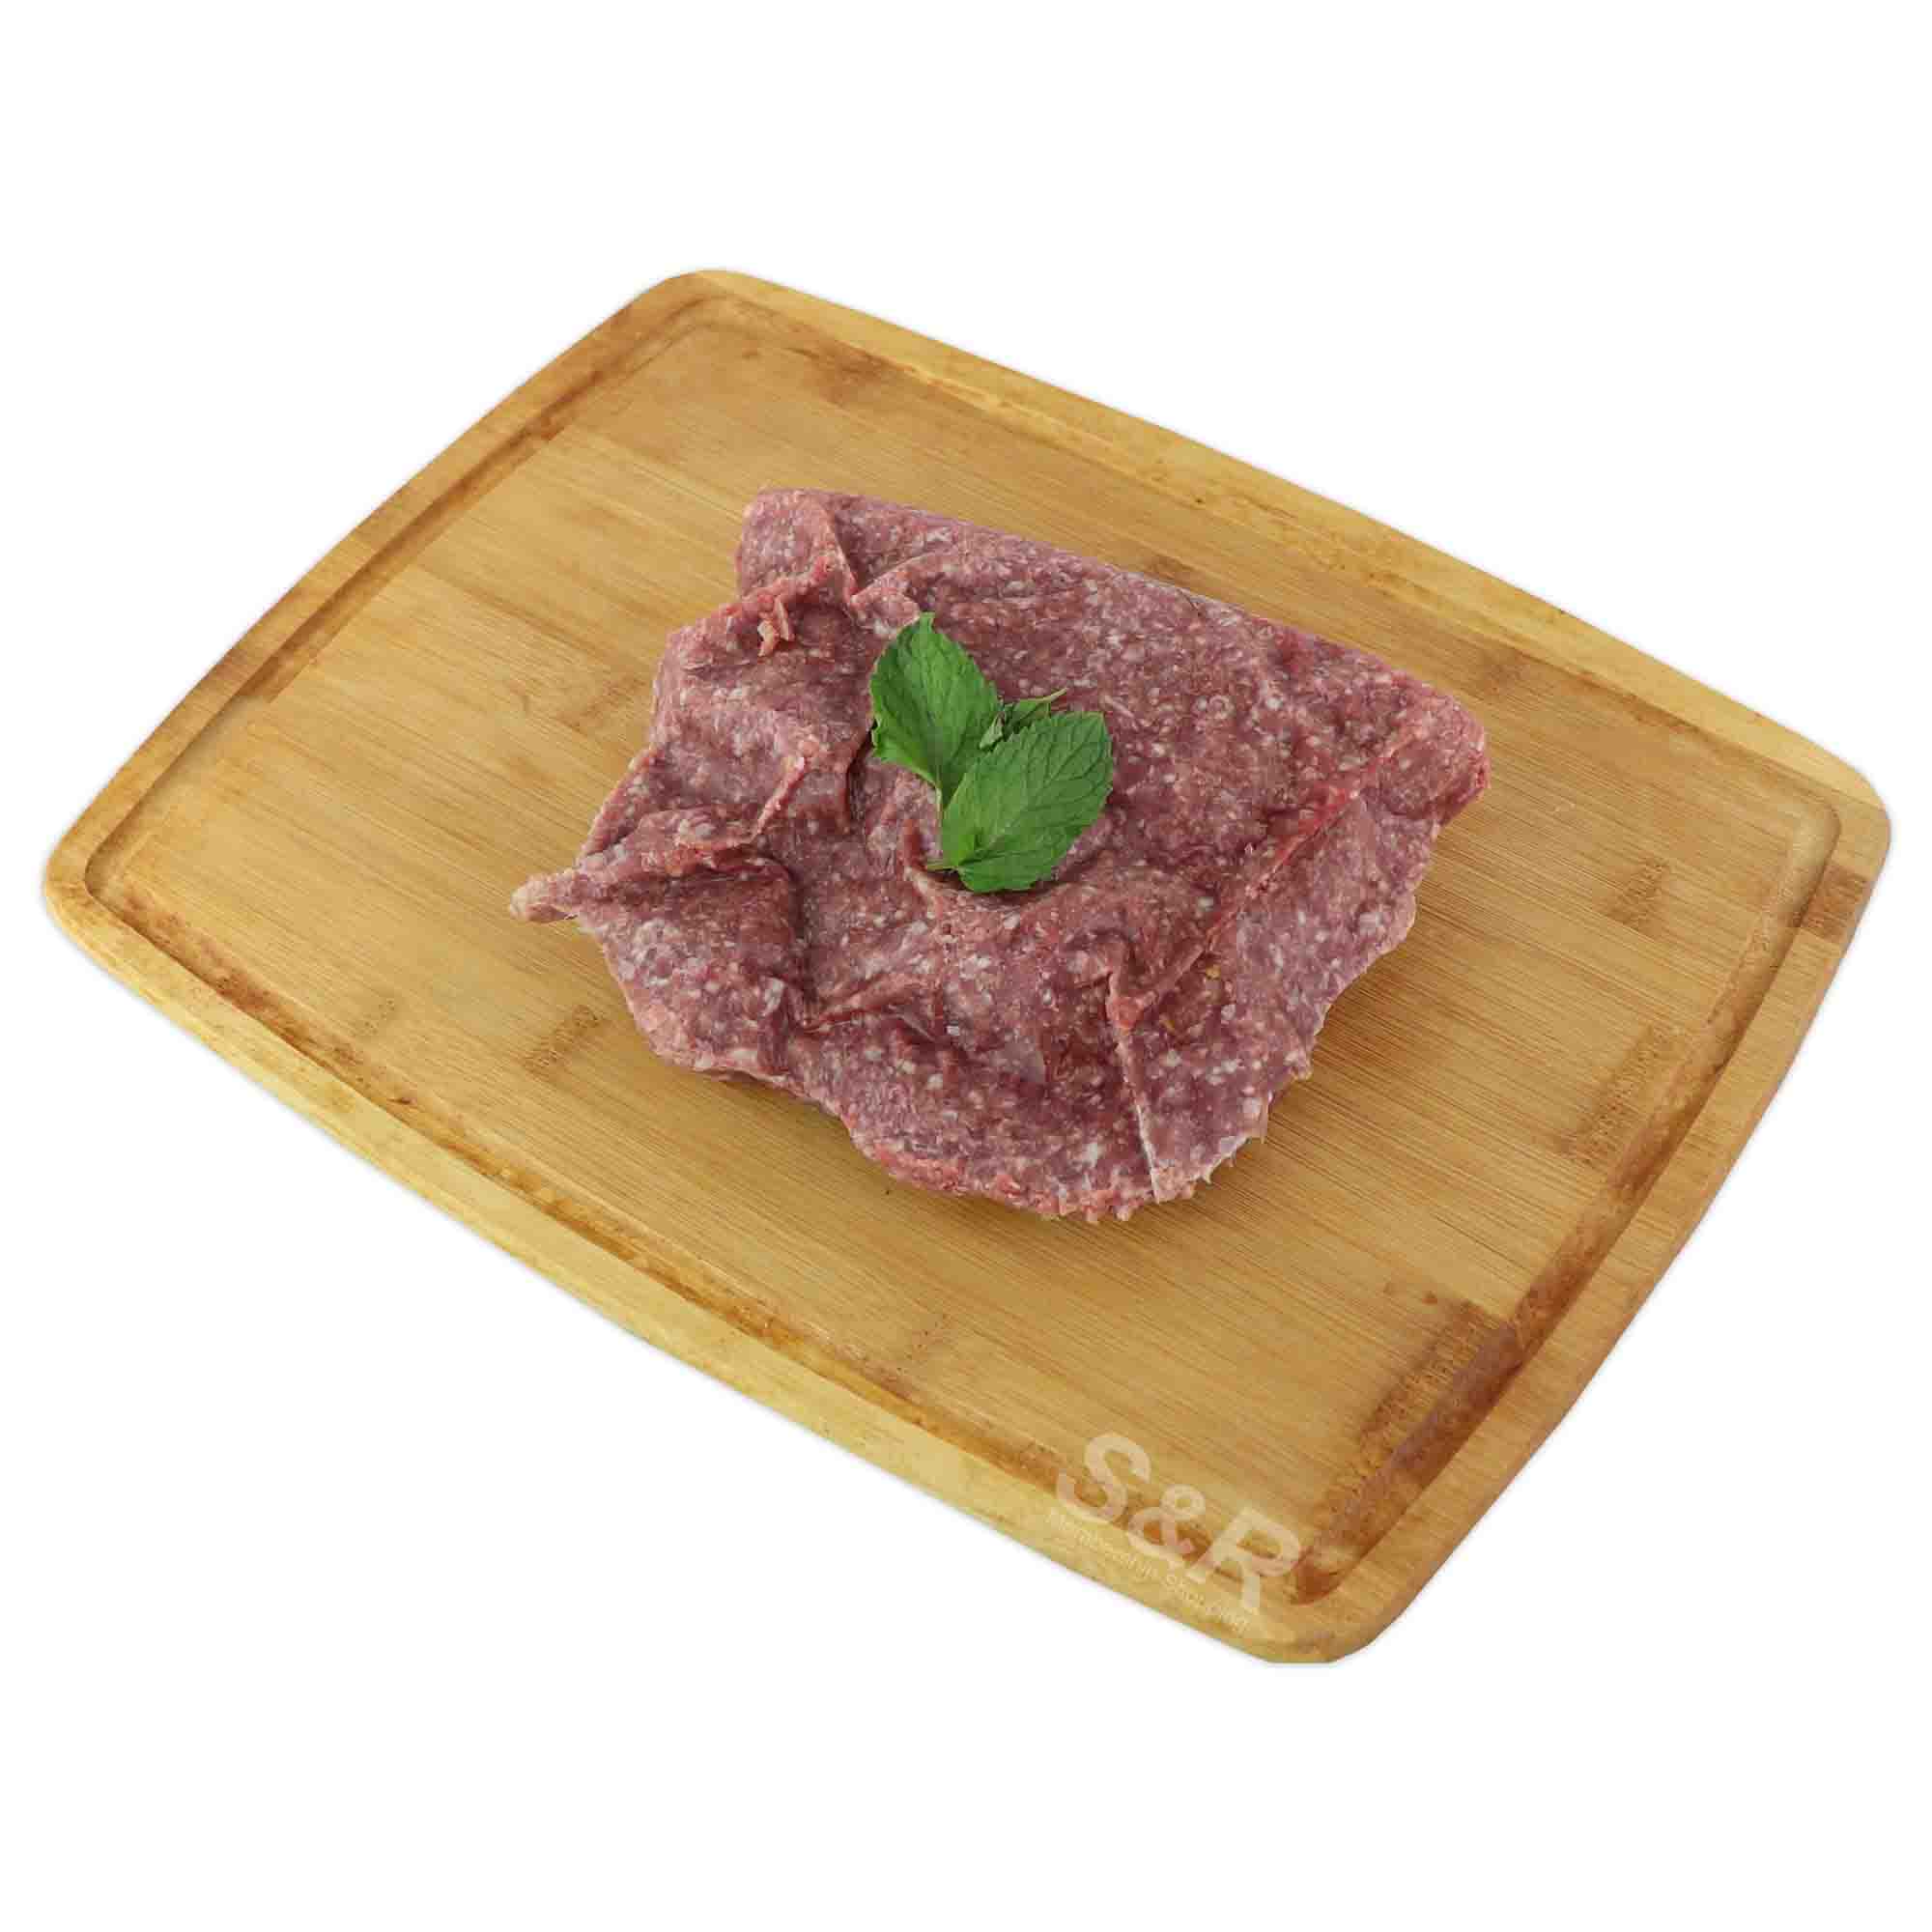 Auszeal Ground Lamb approx. 1.2kg